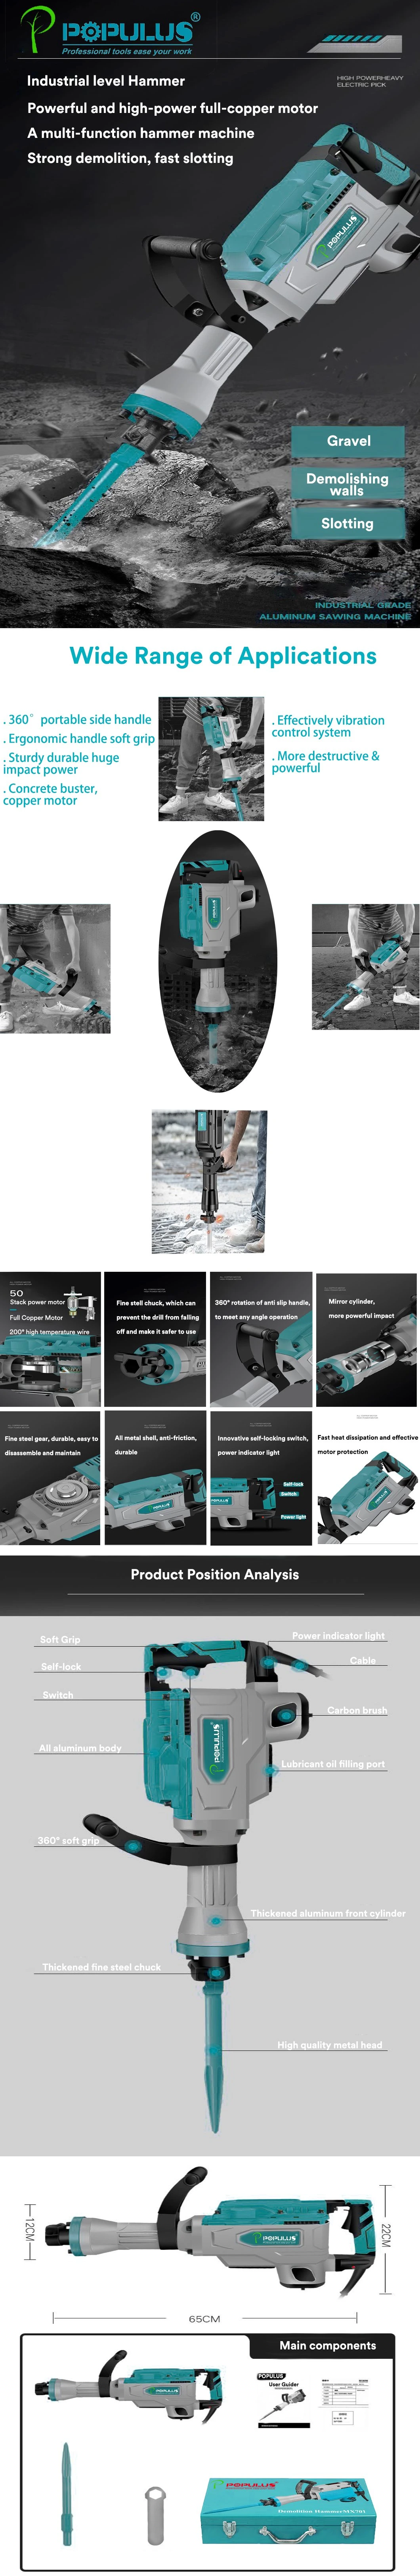 Populus New Arrival Industrial Quality pH65 2250W Demolition Breaker High Quality Electric Demolition Hammer Jack Hammer/Rotary Hammer